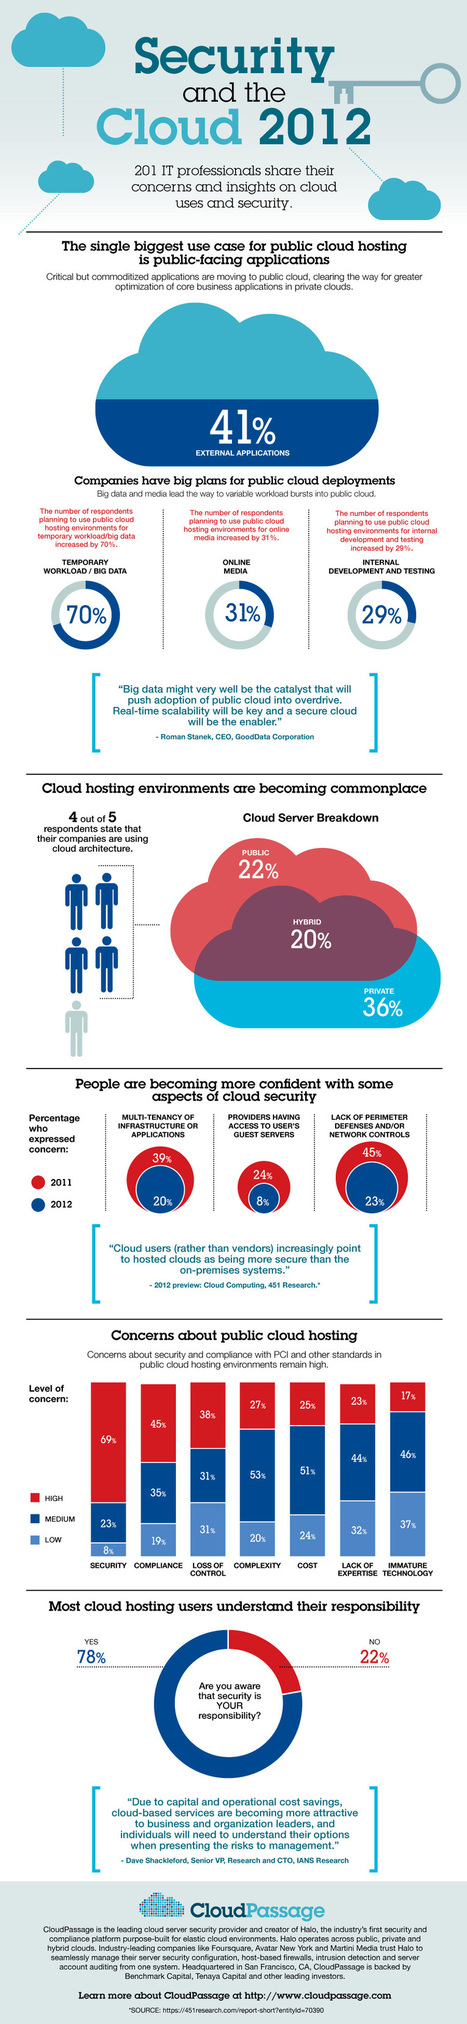 Infographic: Security and the Cloud 2012 | 21st Century Learning and Teaching | Scoop.it